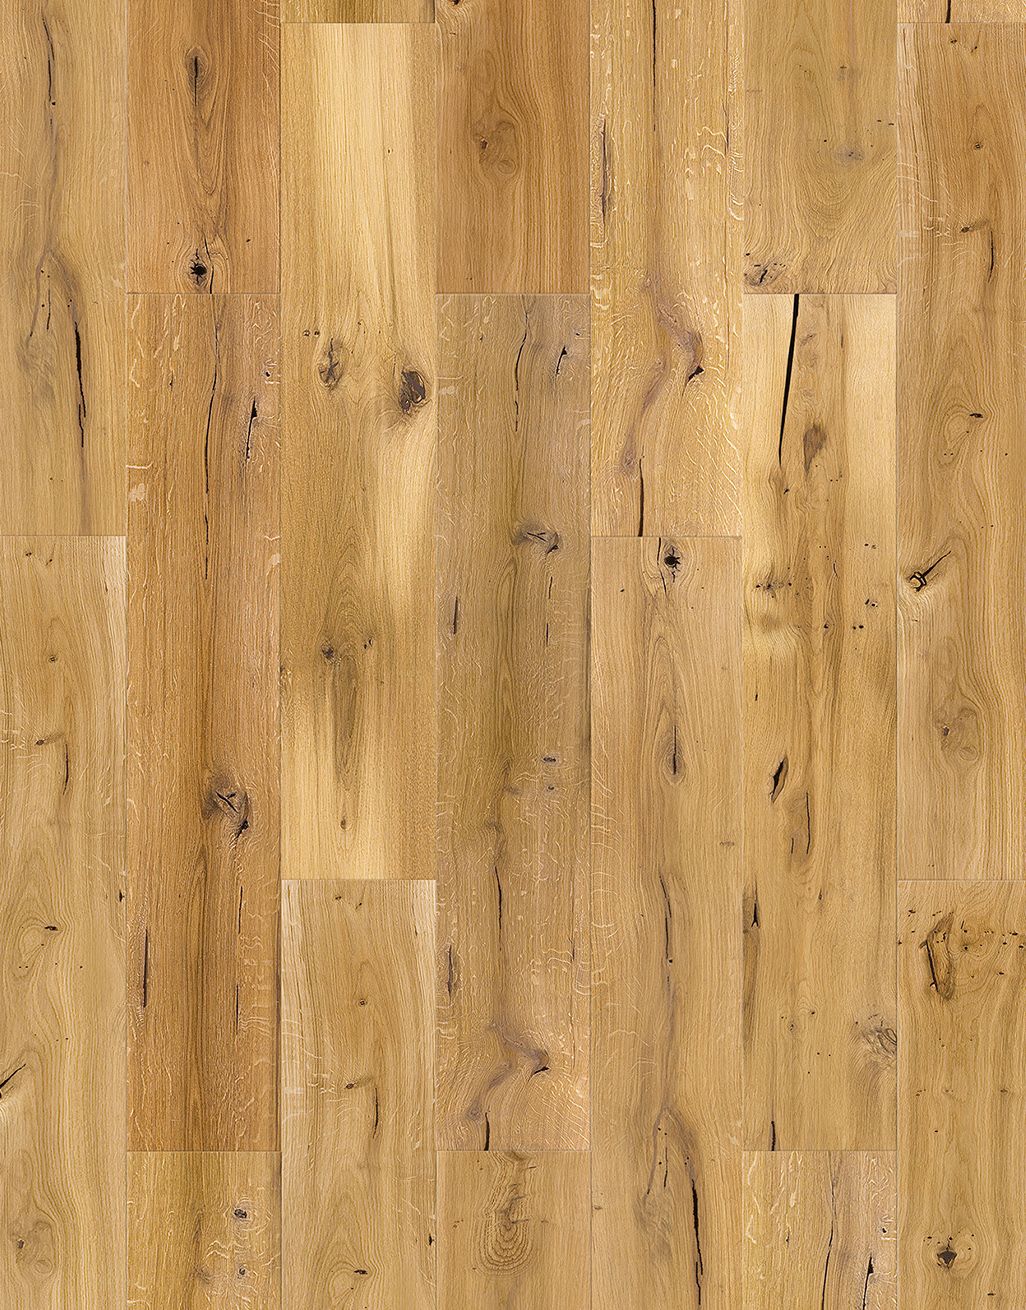 Carpenters Choice 130mm - Natural Oak Lacquered Engineered Wood Flooring 4